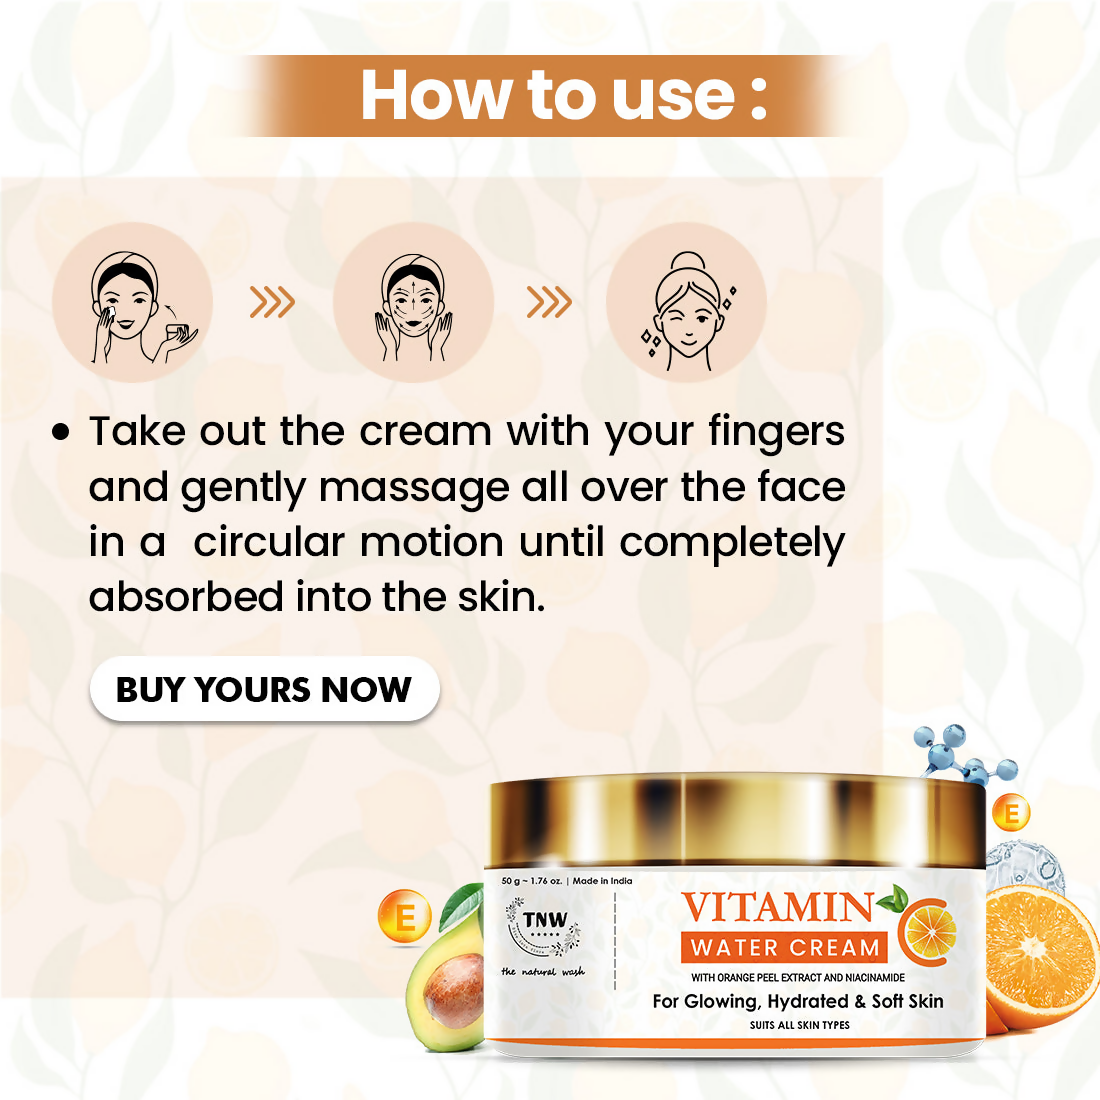 The Natural Wash Vitamin C Water Cream For Hydrated Skin